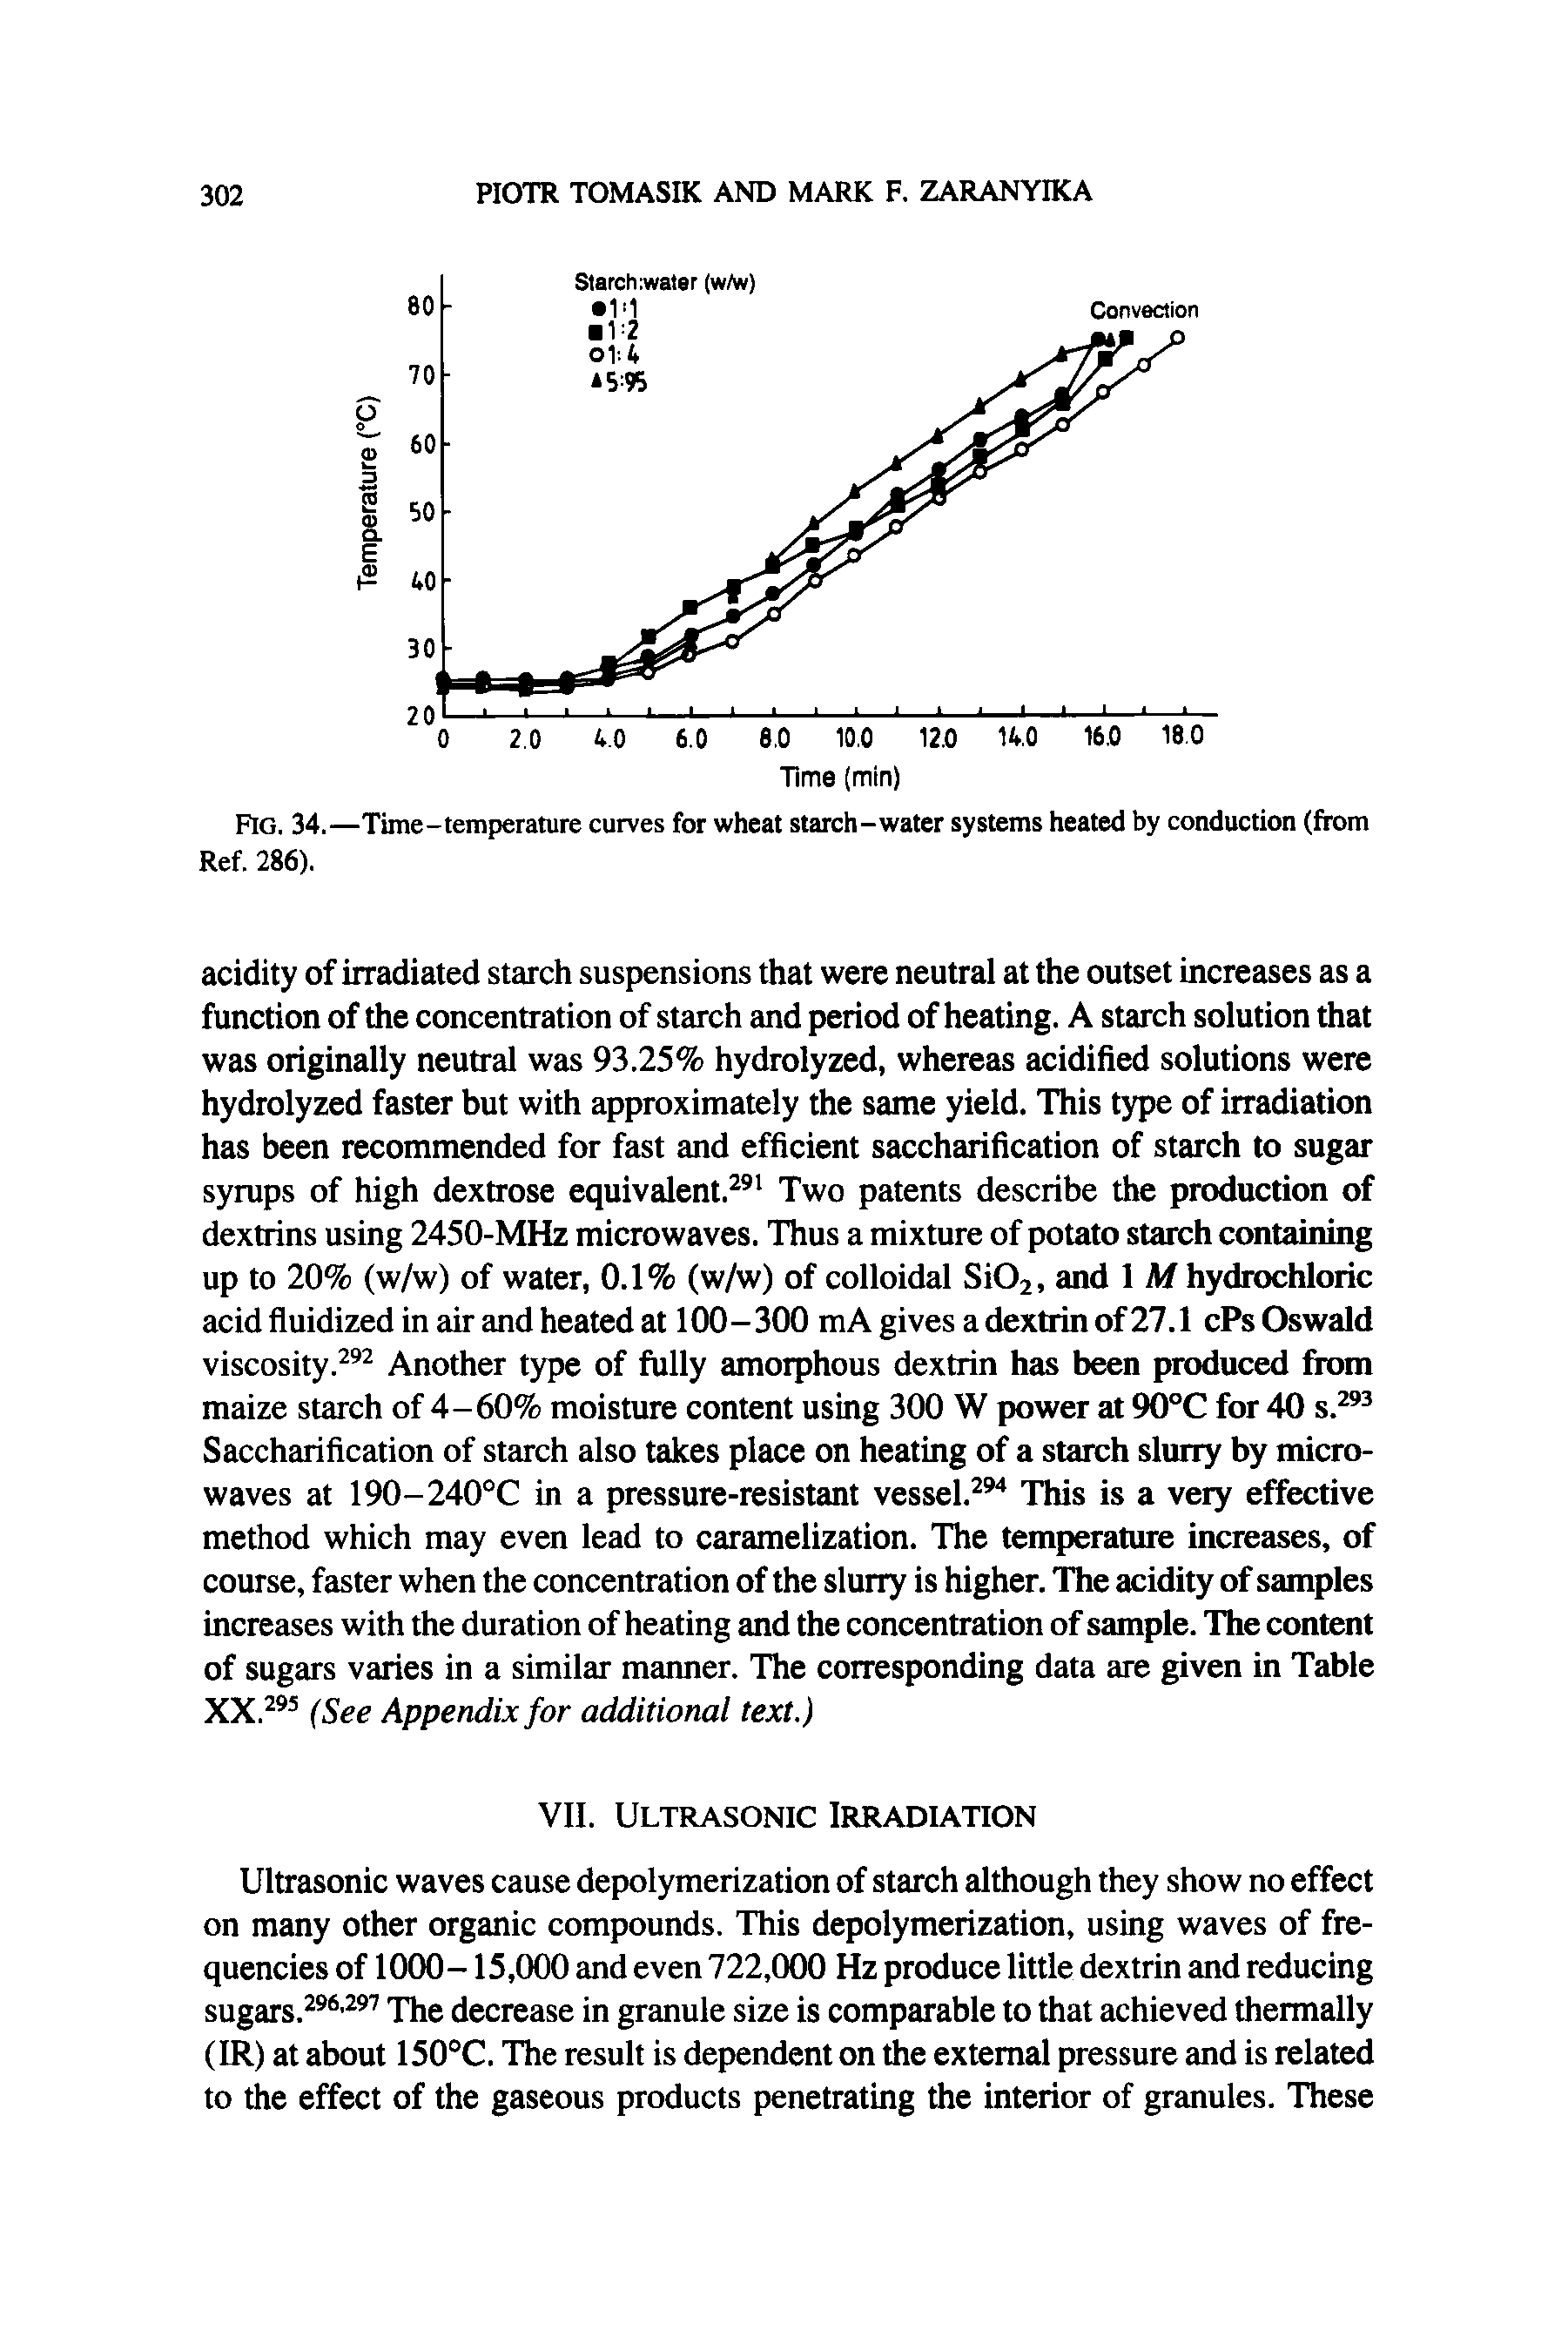 Fig. 34.—Time-temperature curves for wheat starch-water systems heated by conduction (from Ref. 286).